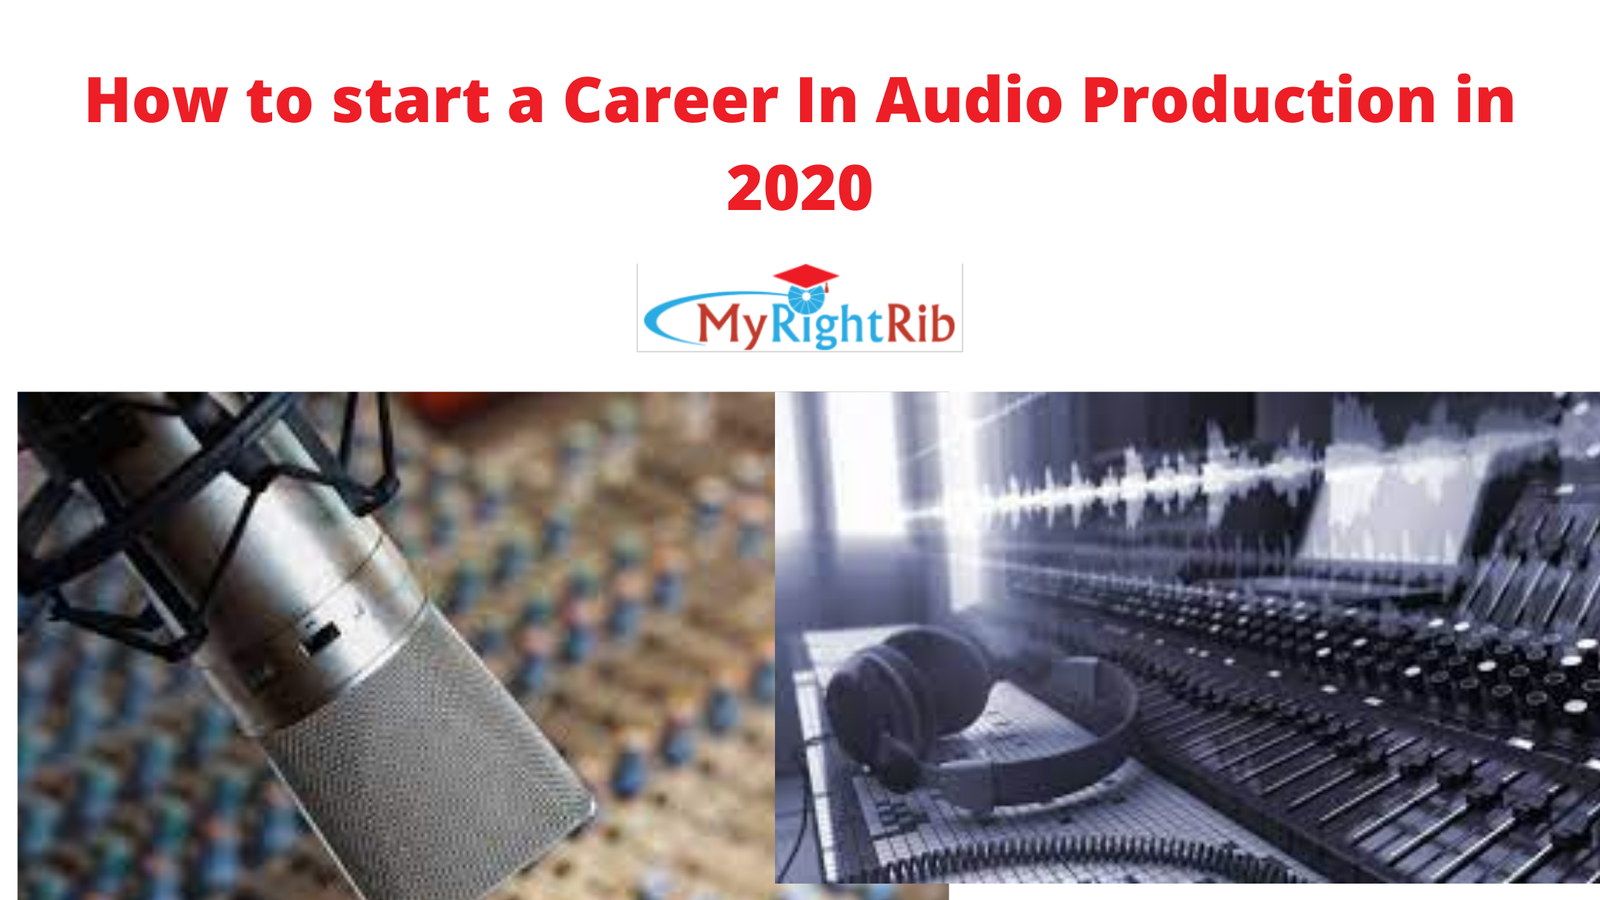 How to start a Career in Audio Production in 2020